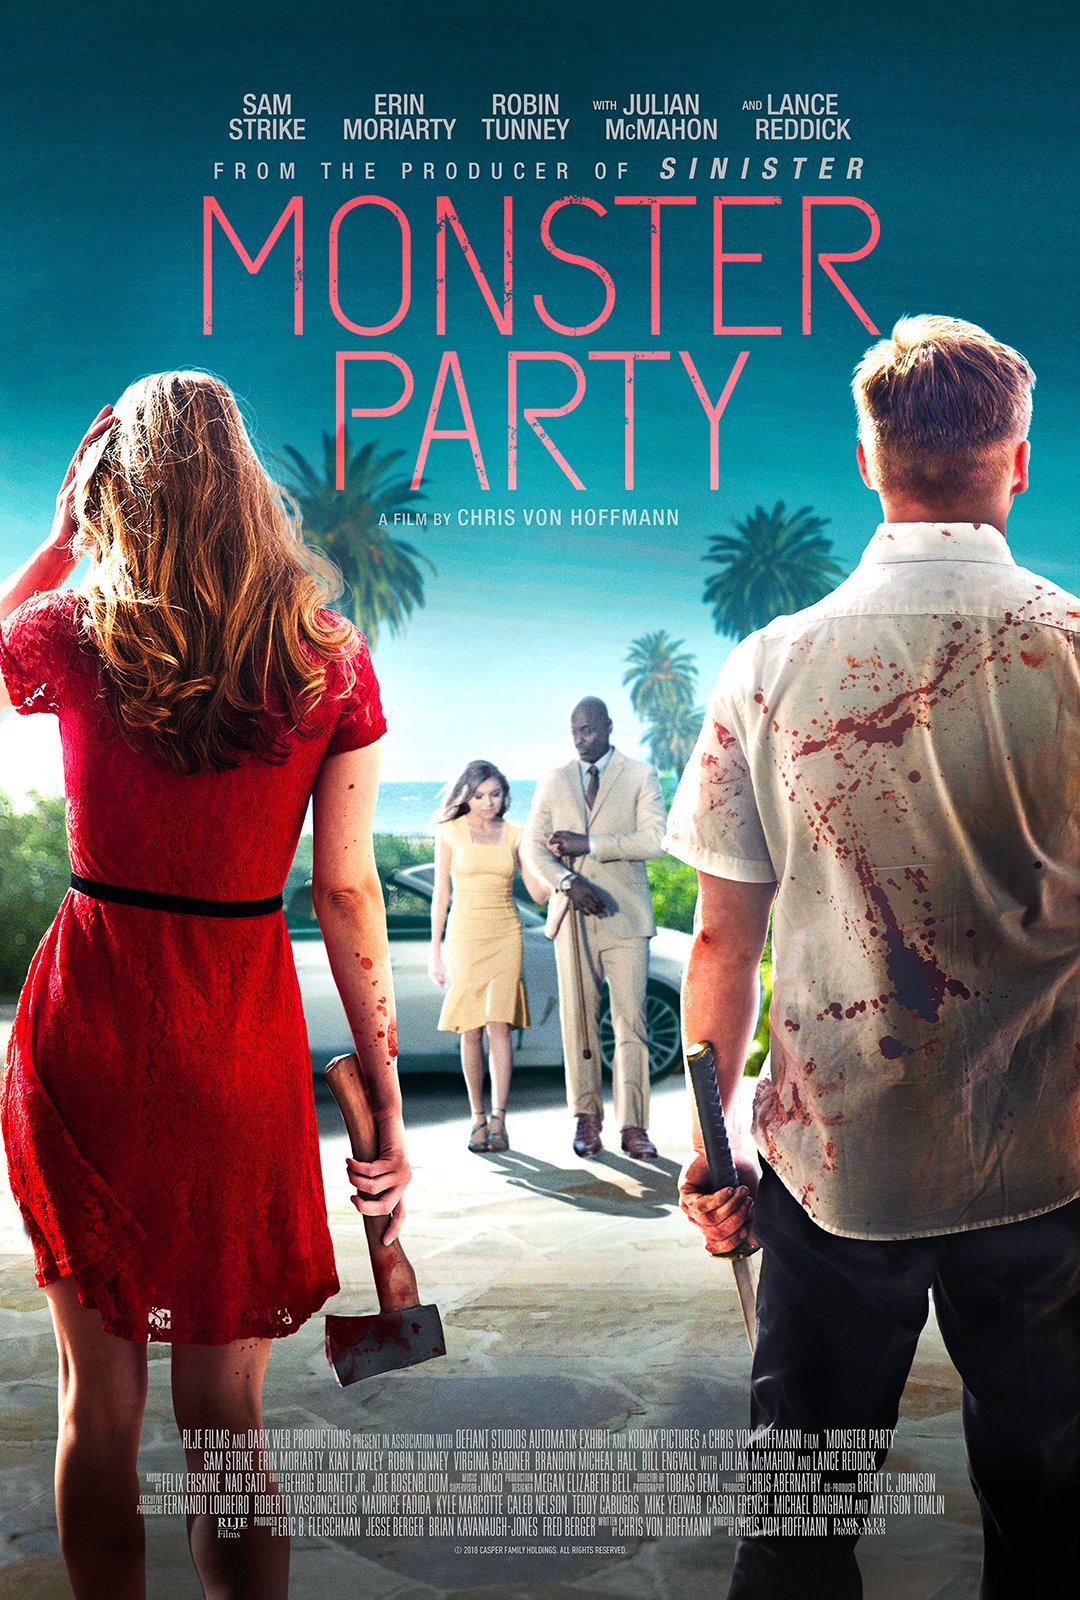 Moster Party trailer